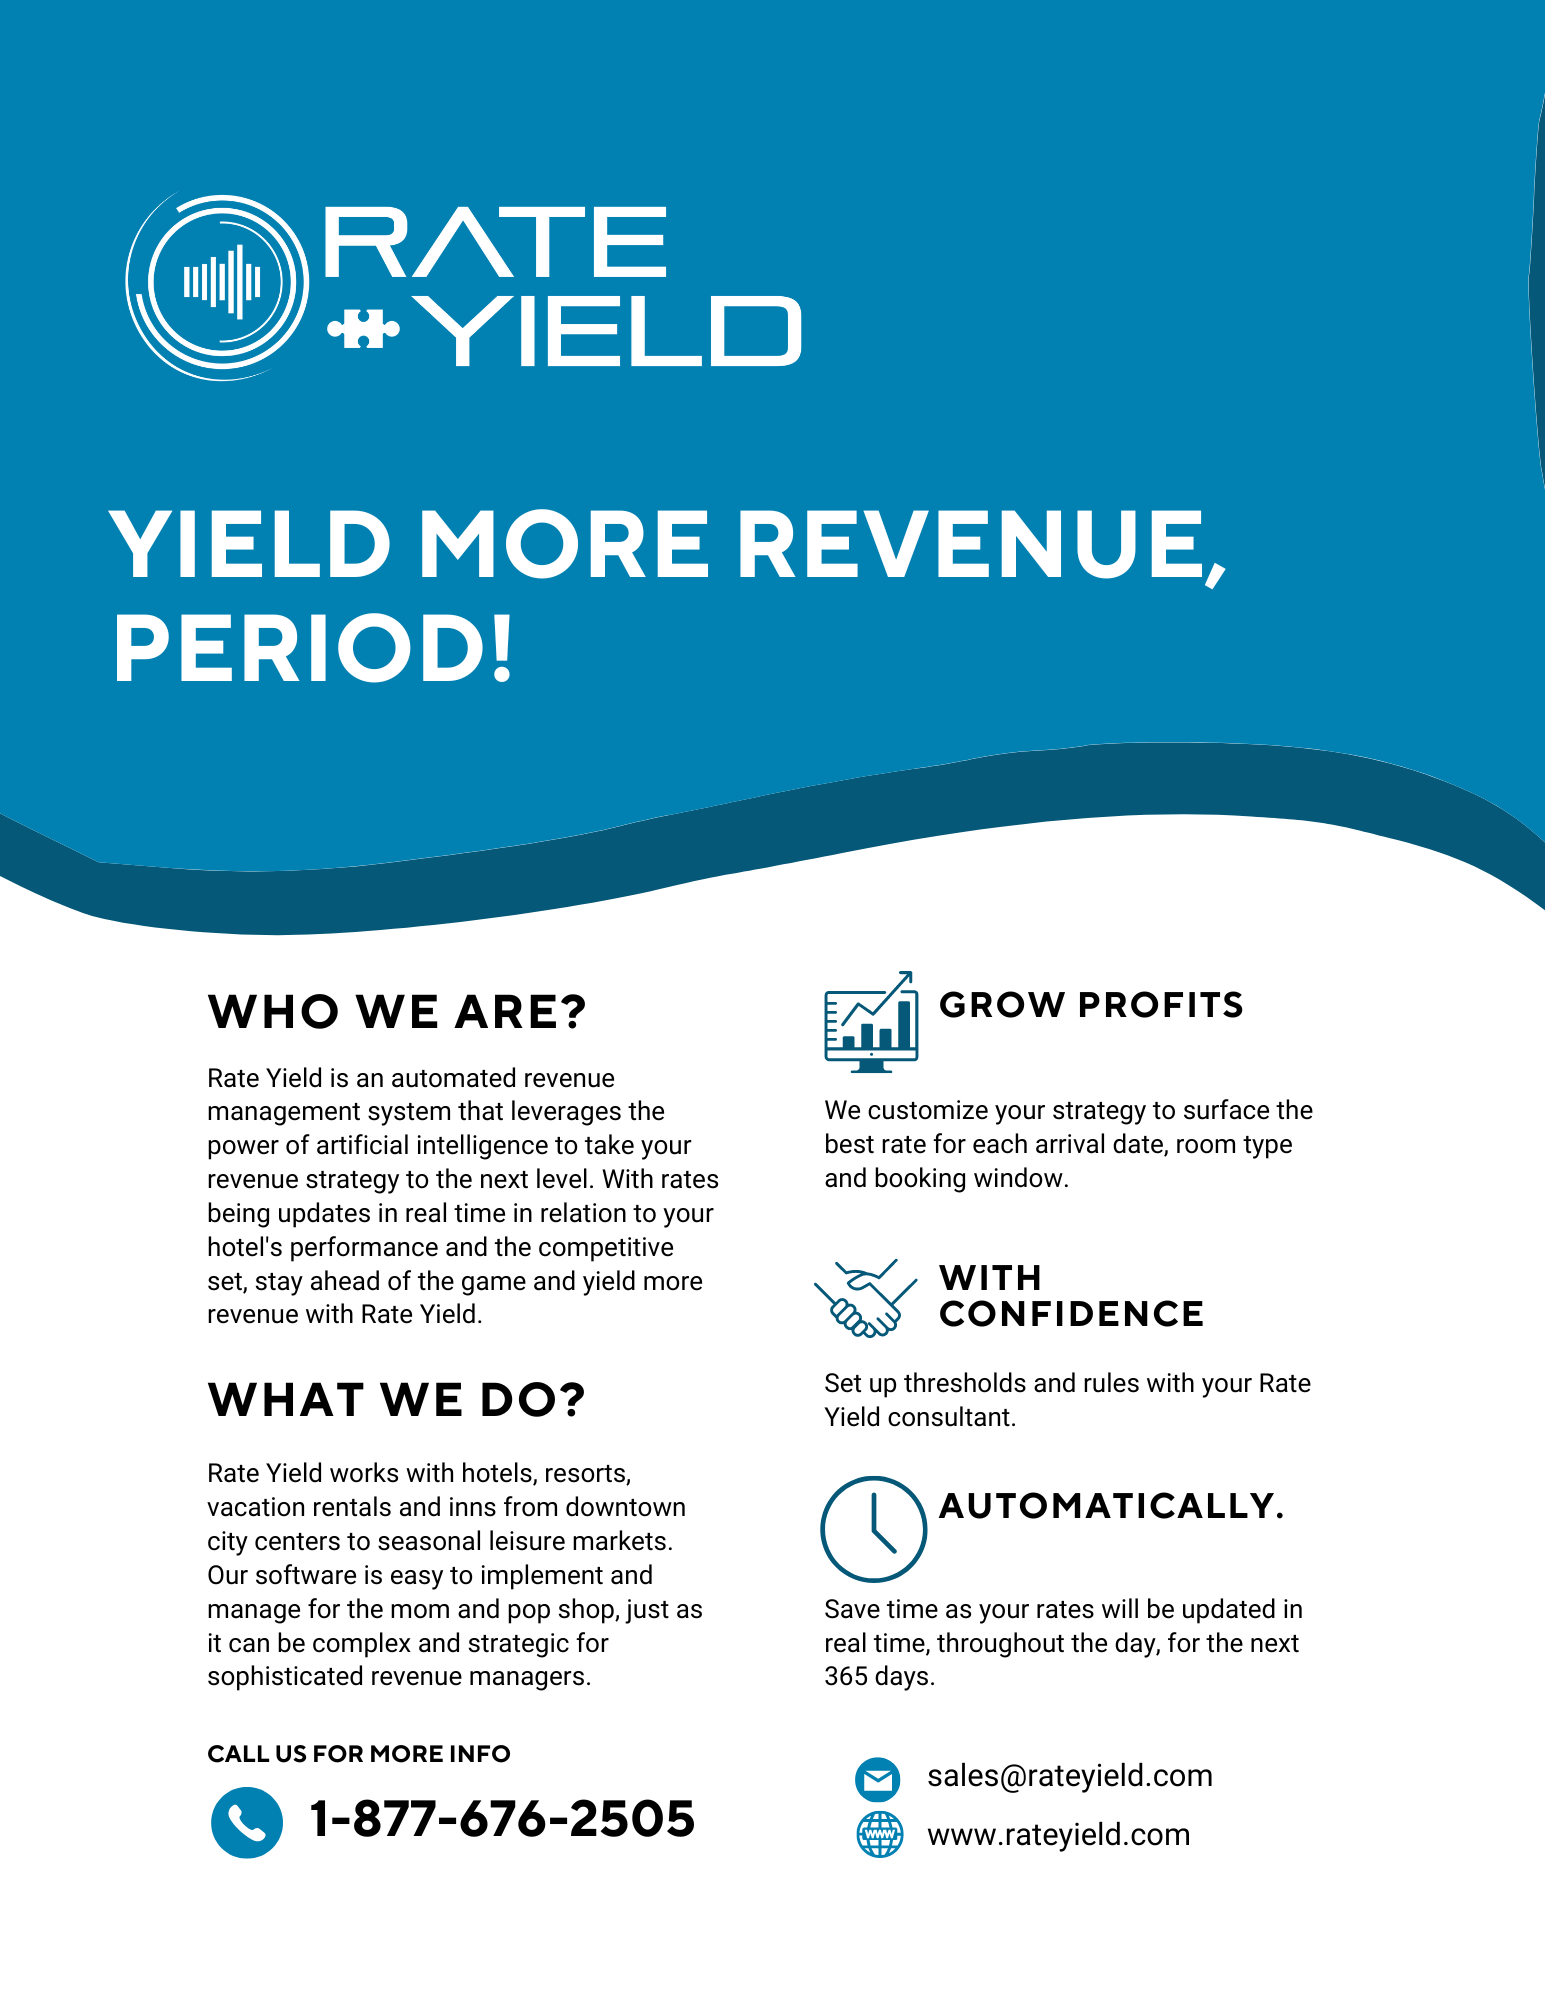 Rate Yield product image 1